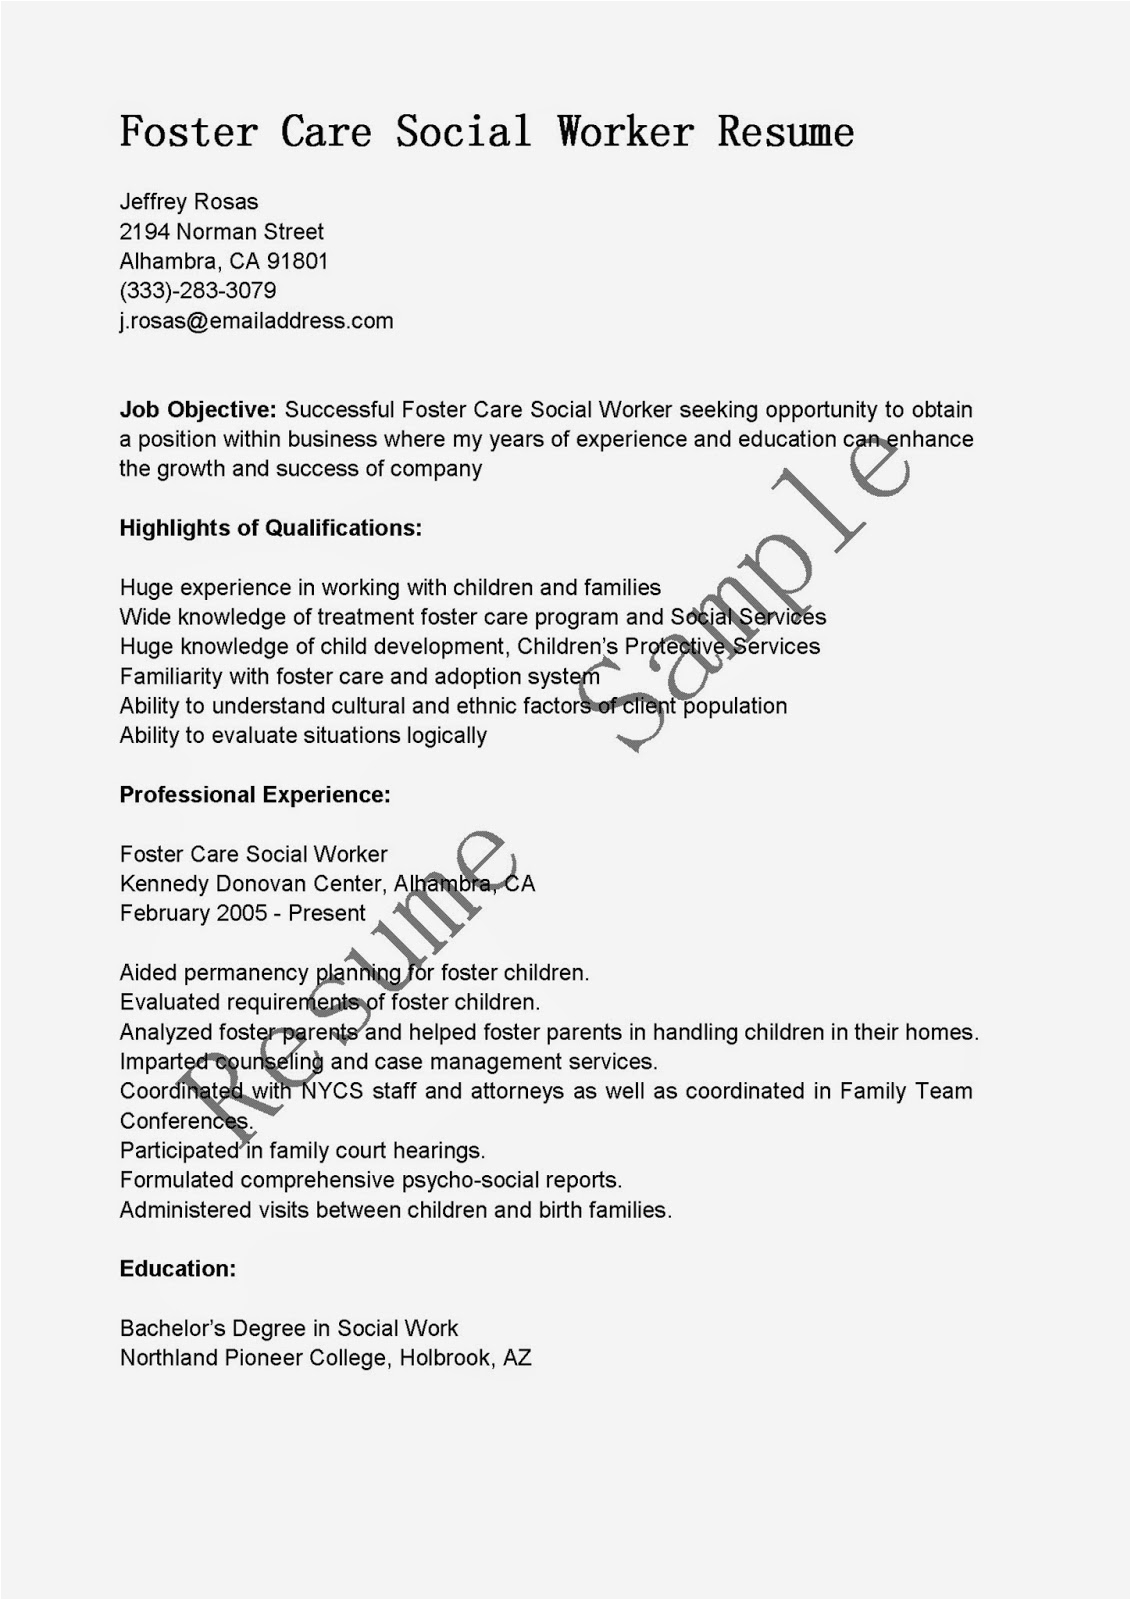 Foster School Of Business Resume Template Resume Samples Foster Care social Worker Resume Sample